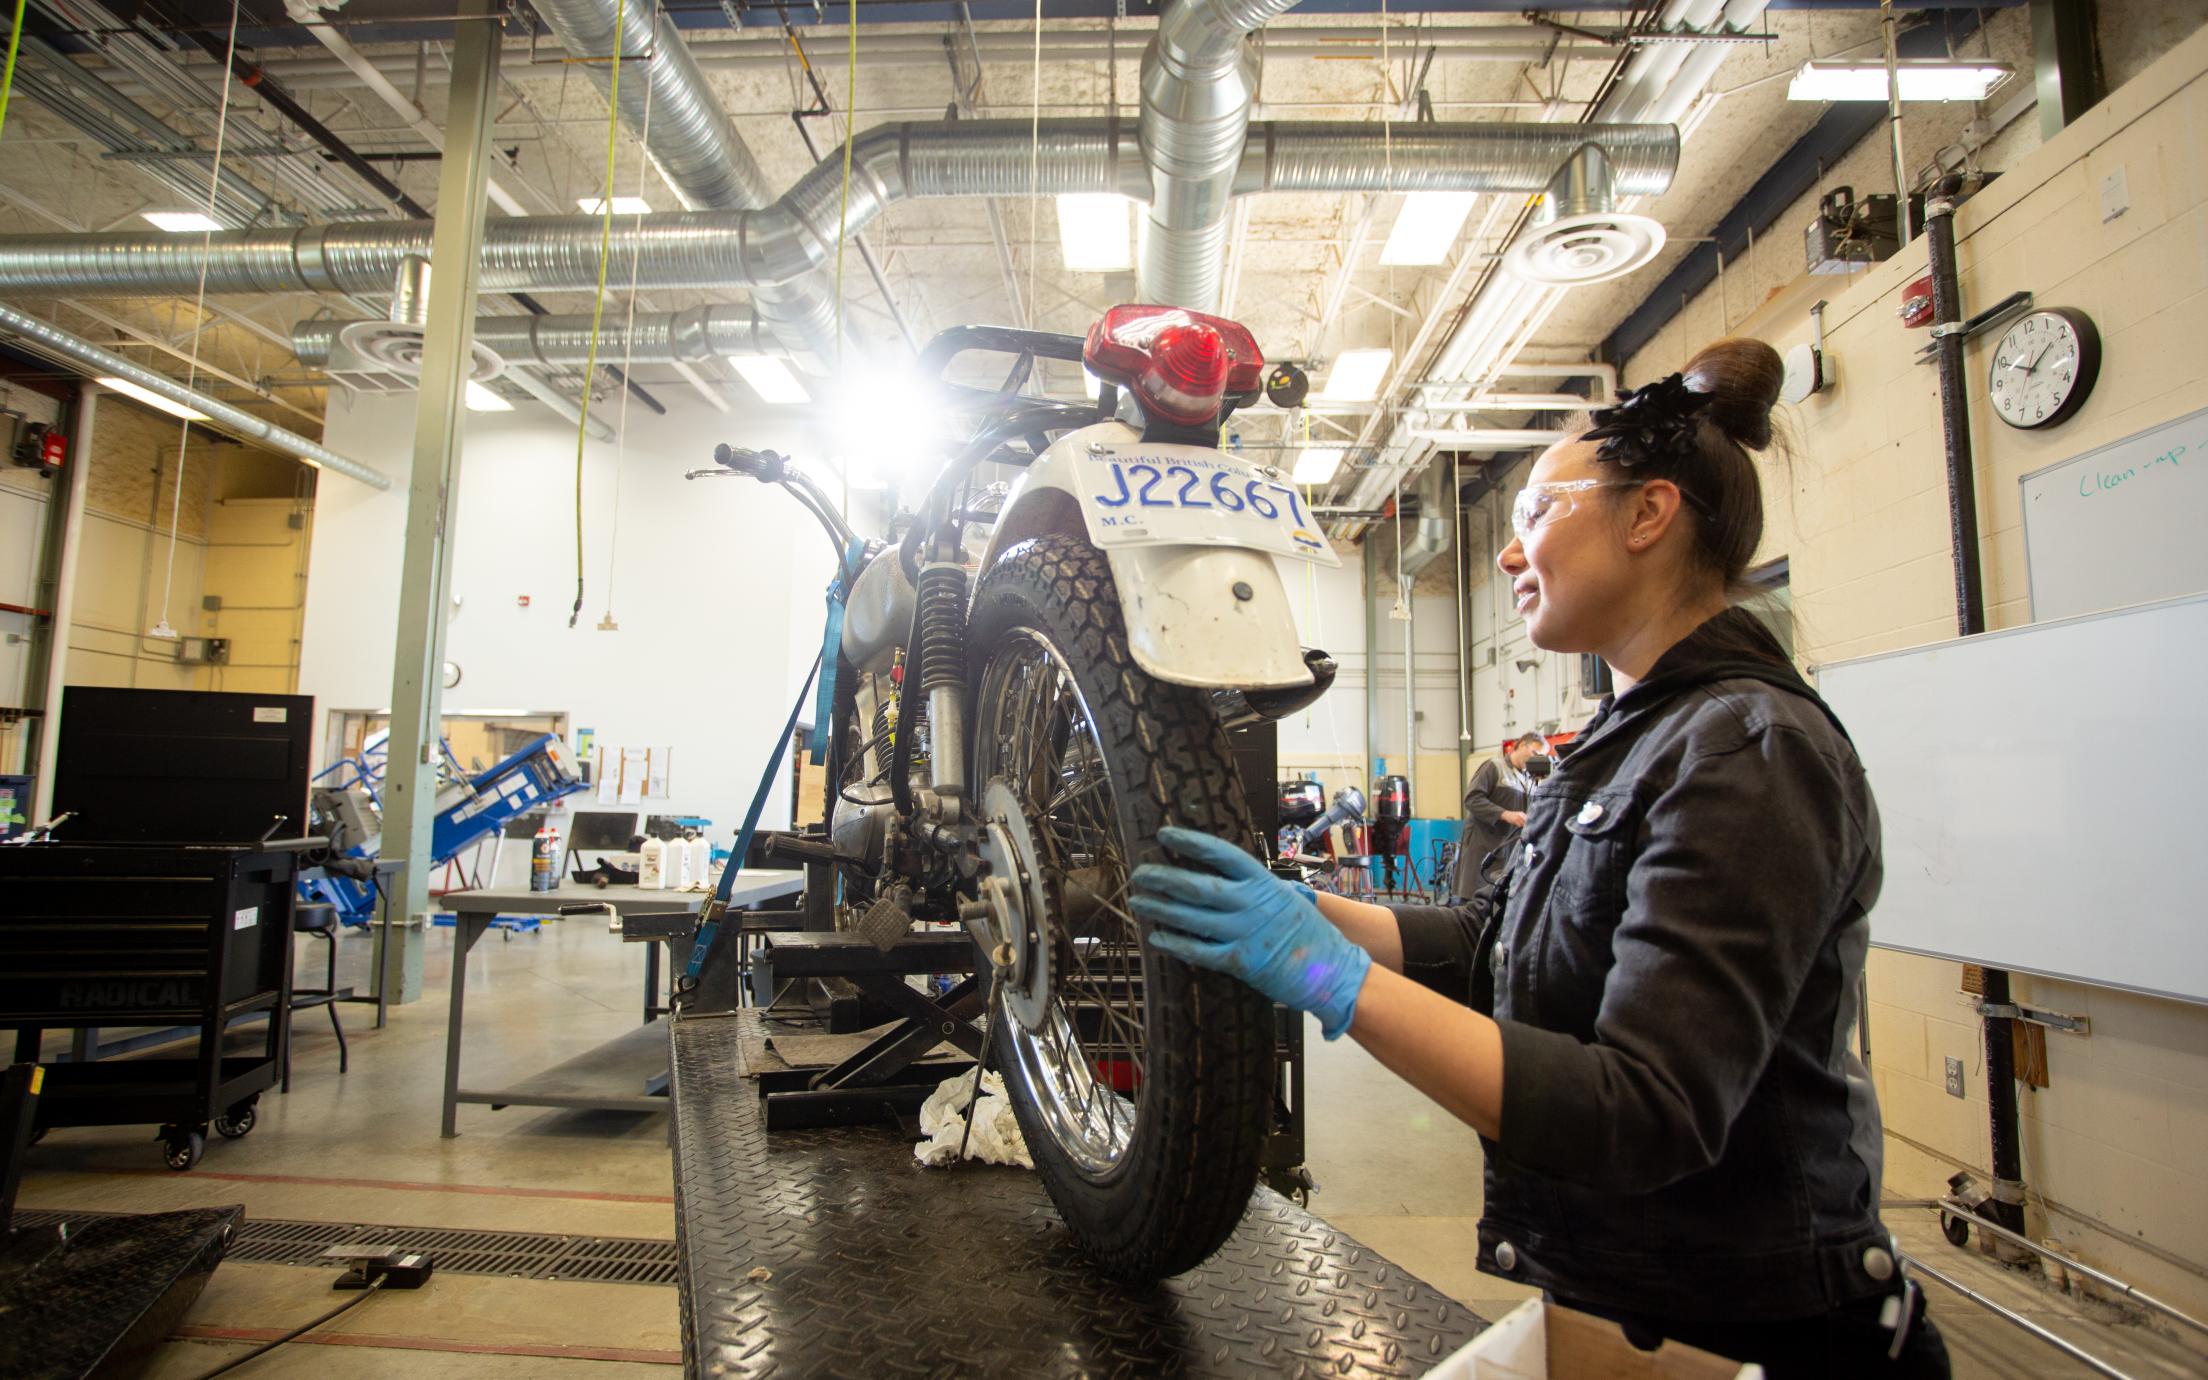 A VIU Motorcycle and Marine Technician stduent works on a motorbike